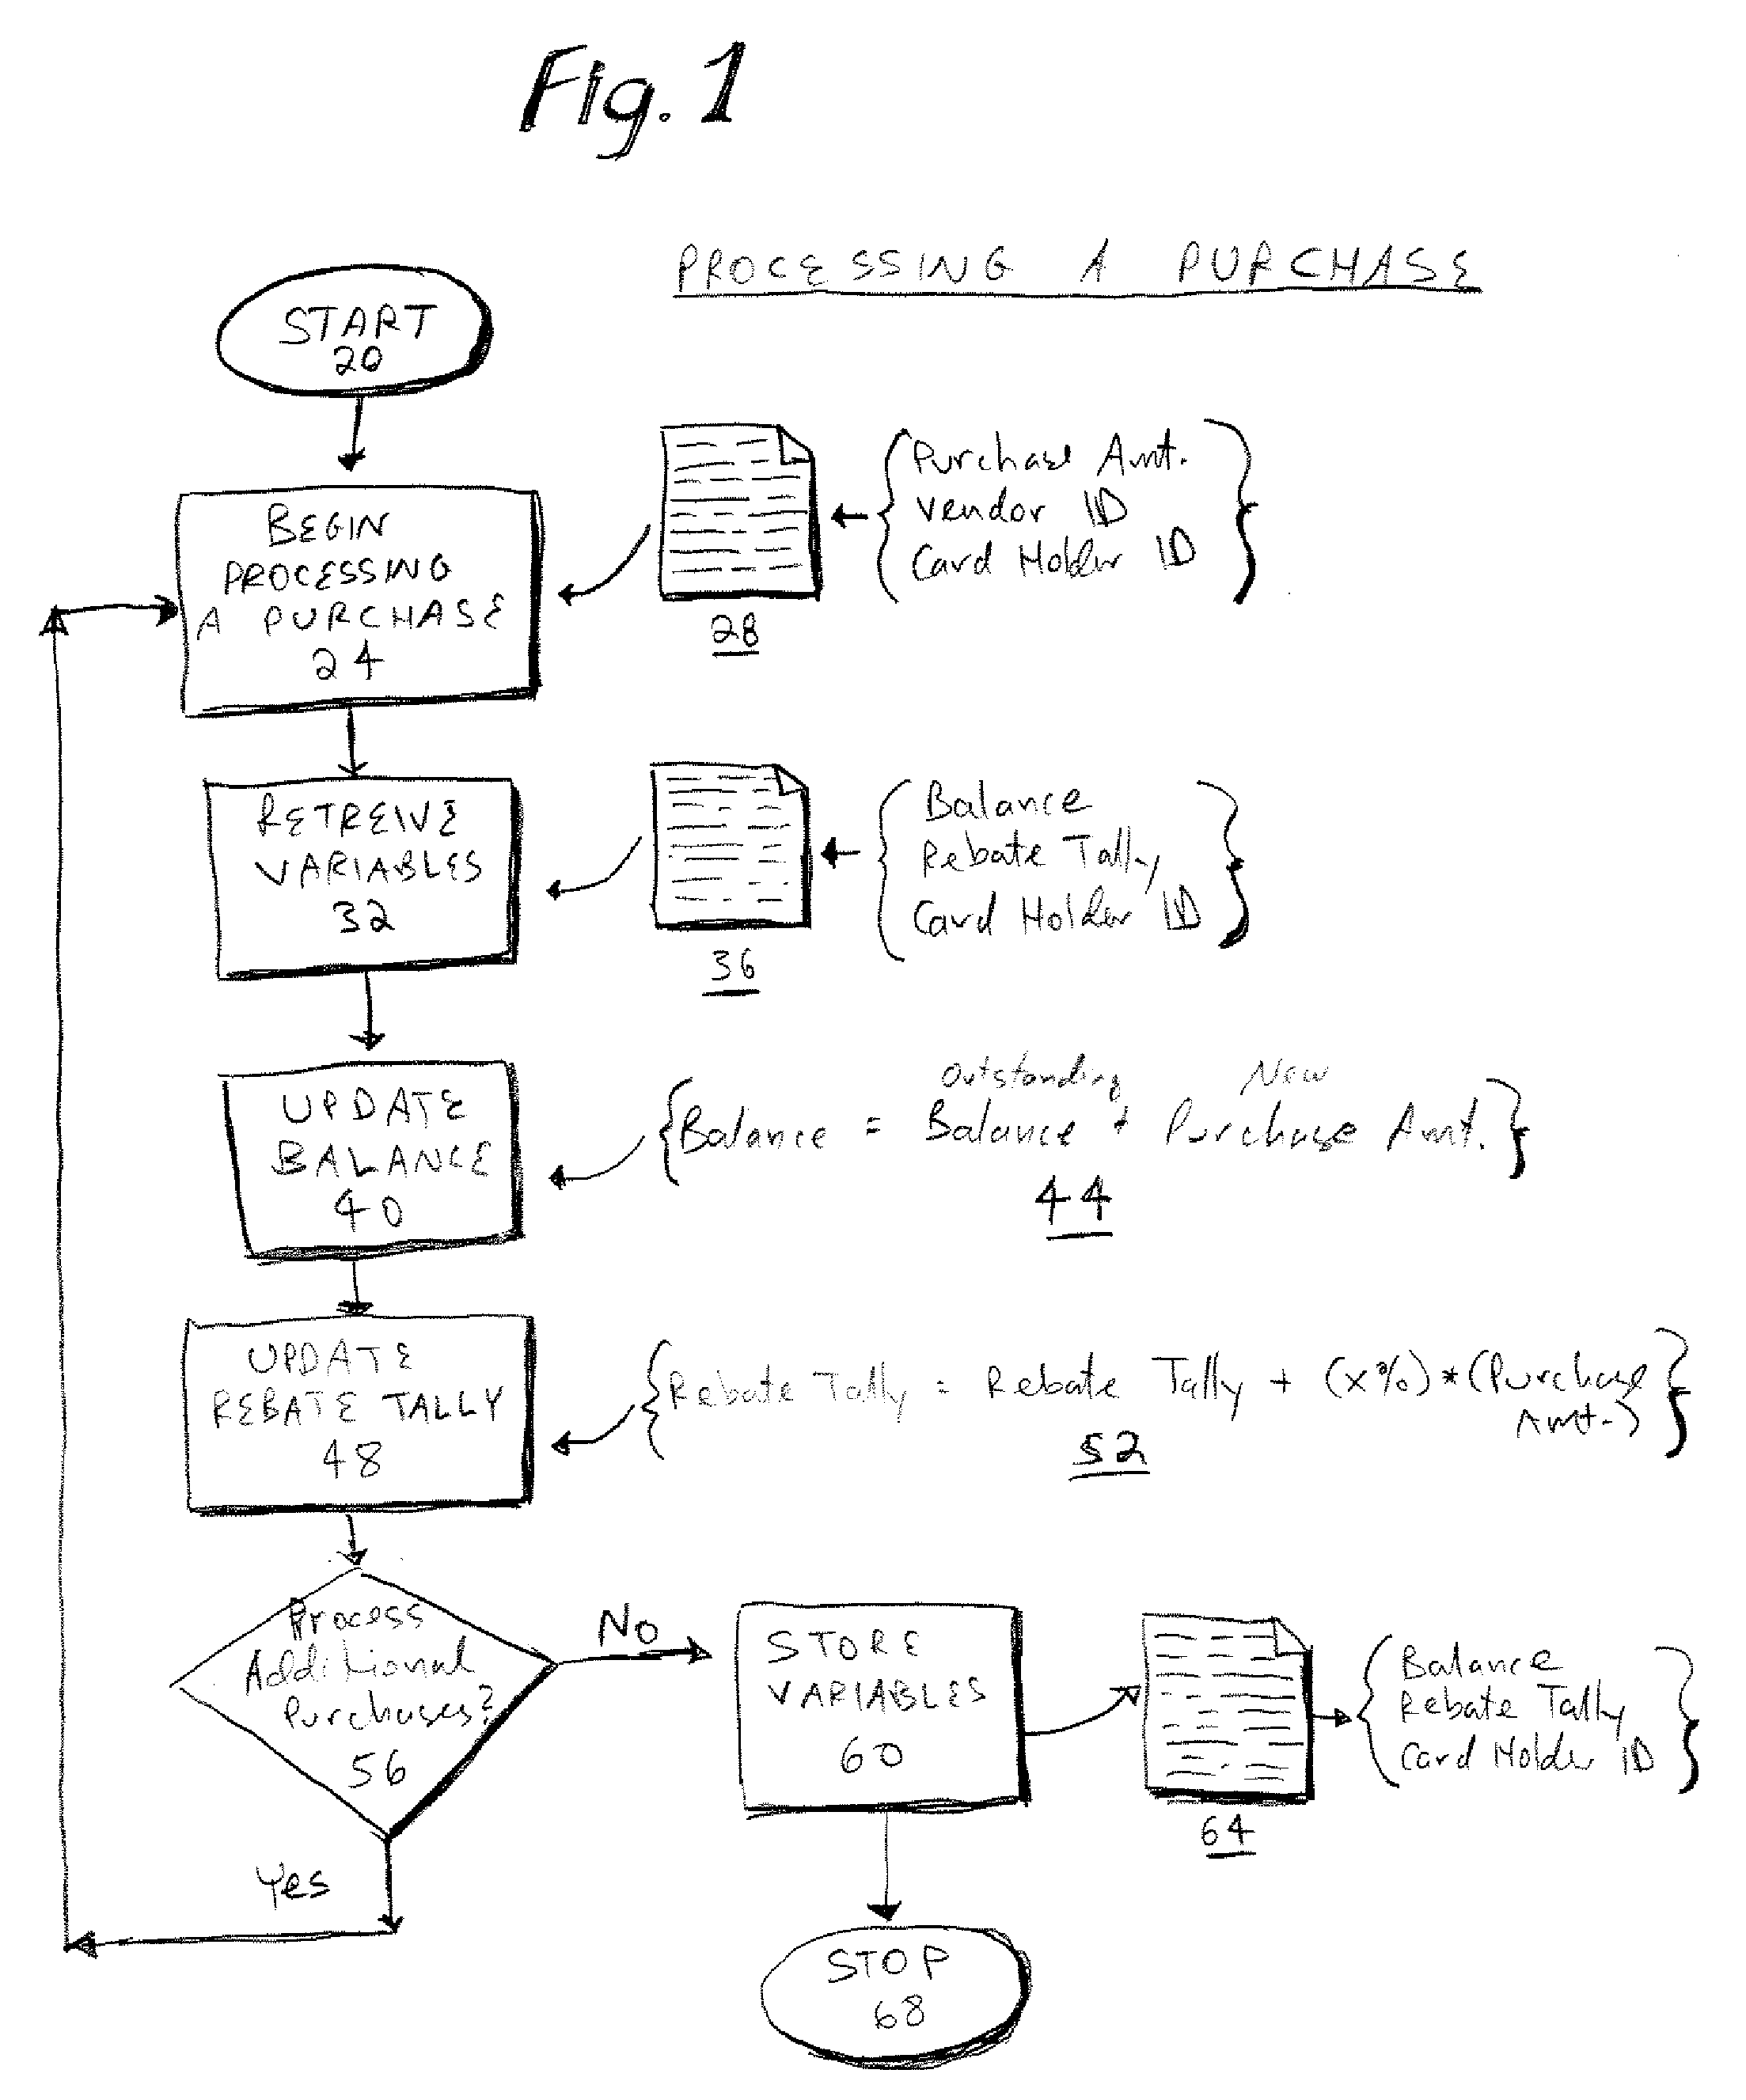 Method and system for awarding rebates based on credit card usage to credit card holders